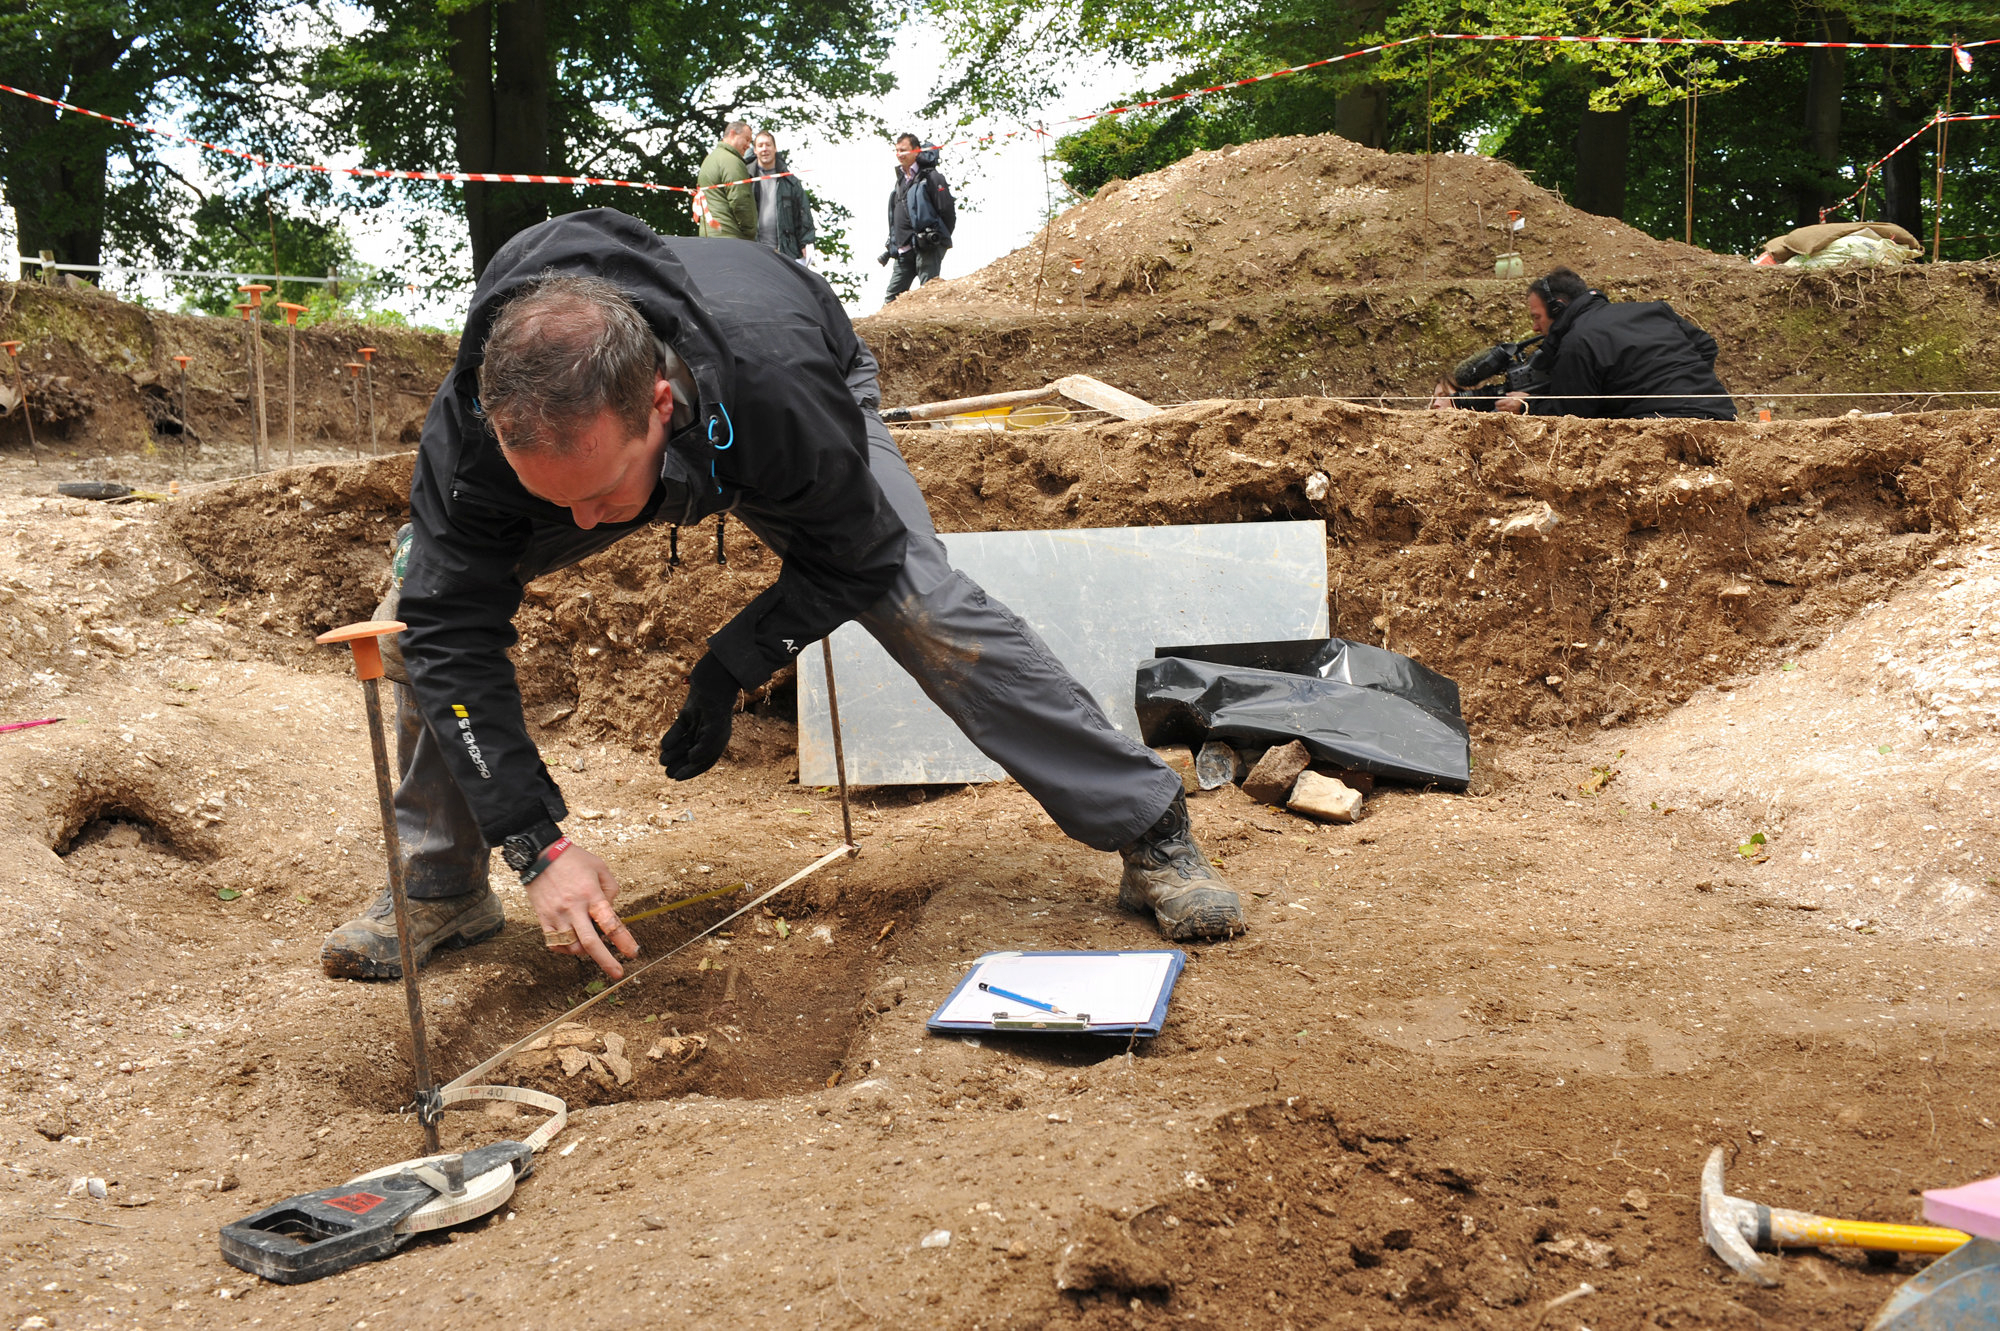 Personnel excavating an archeological dig site.